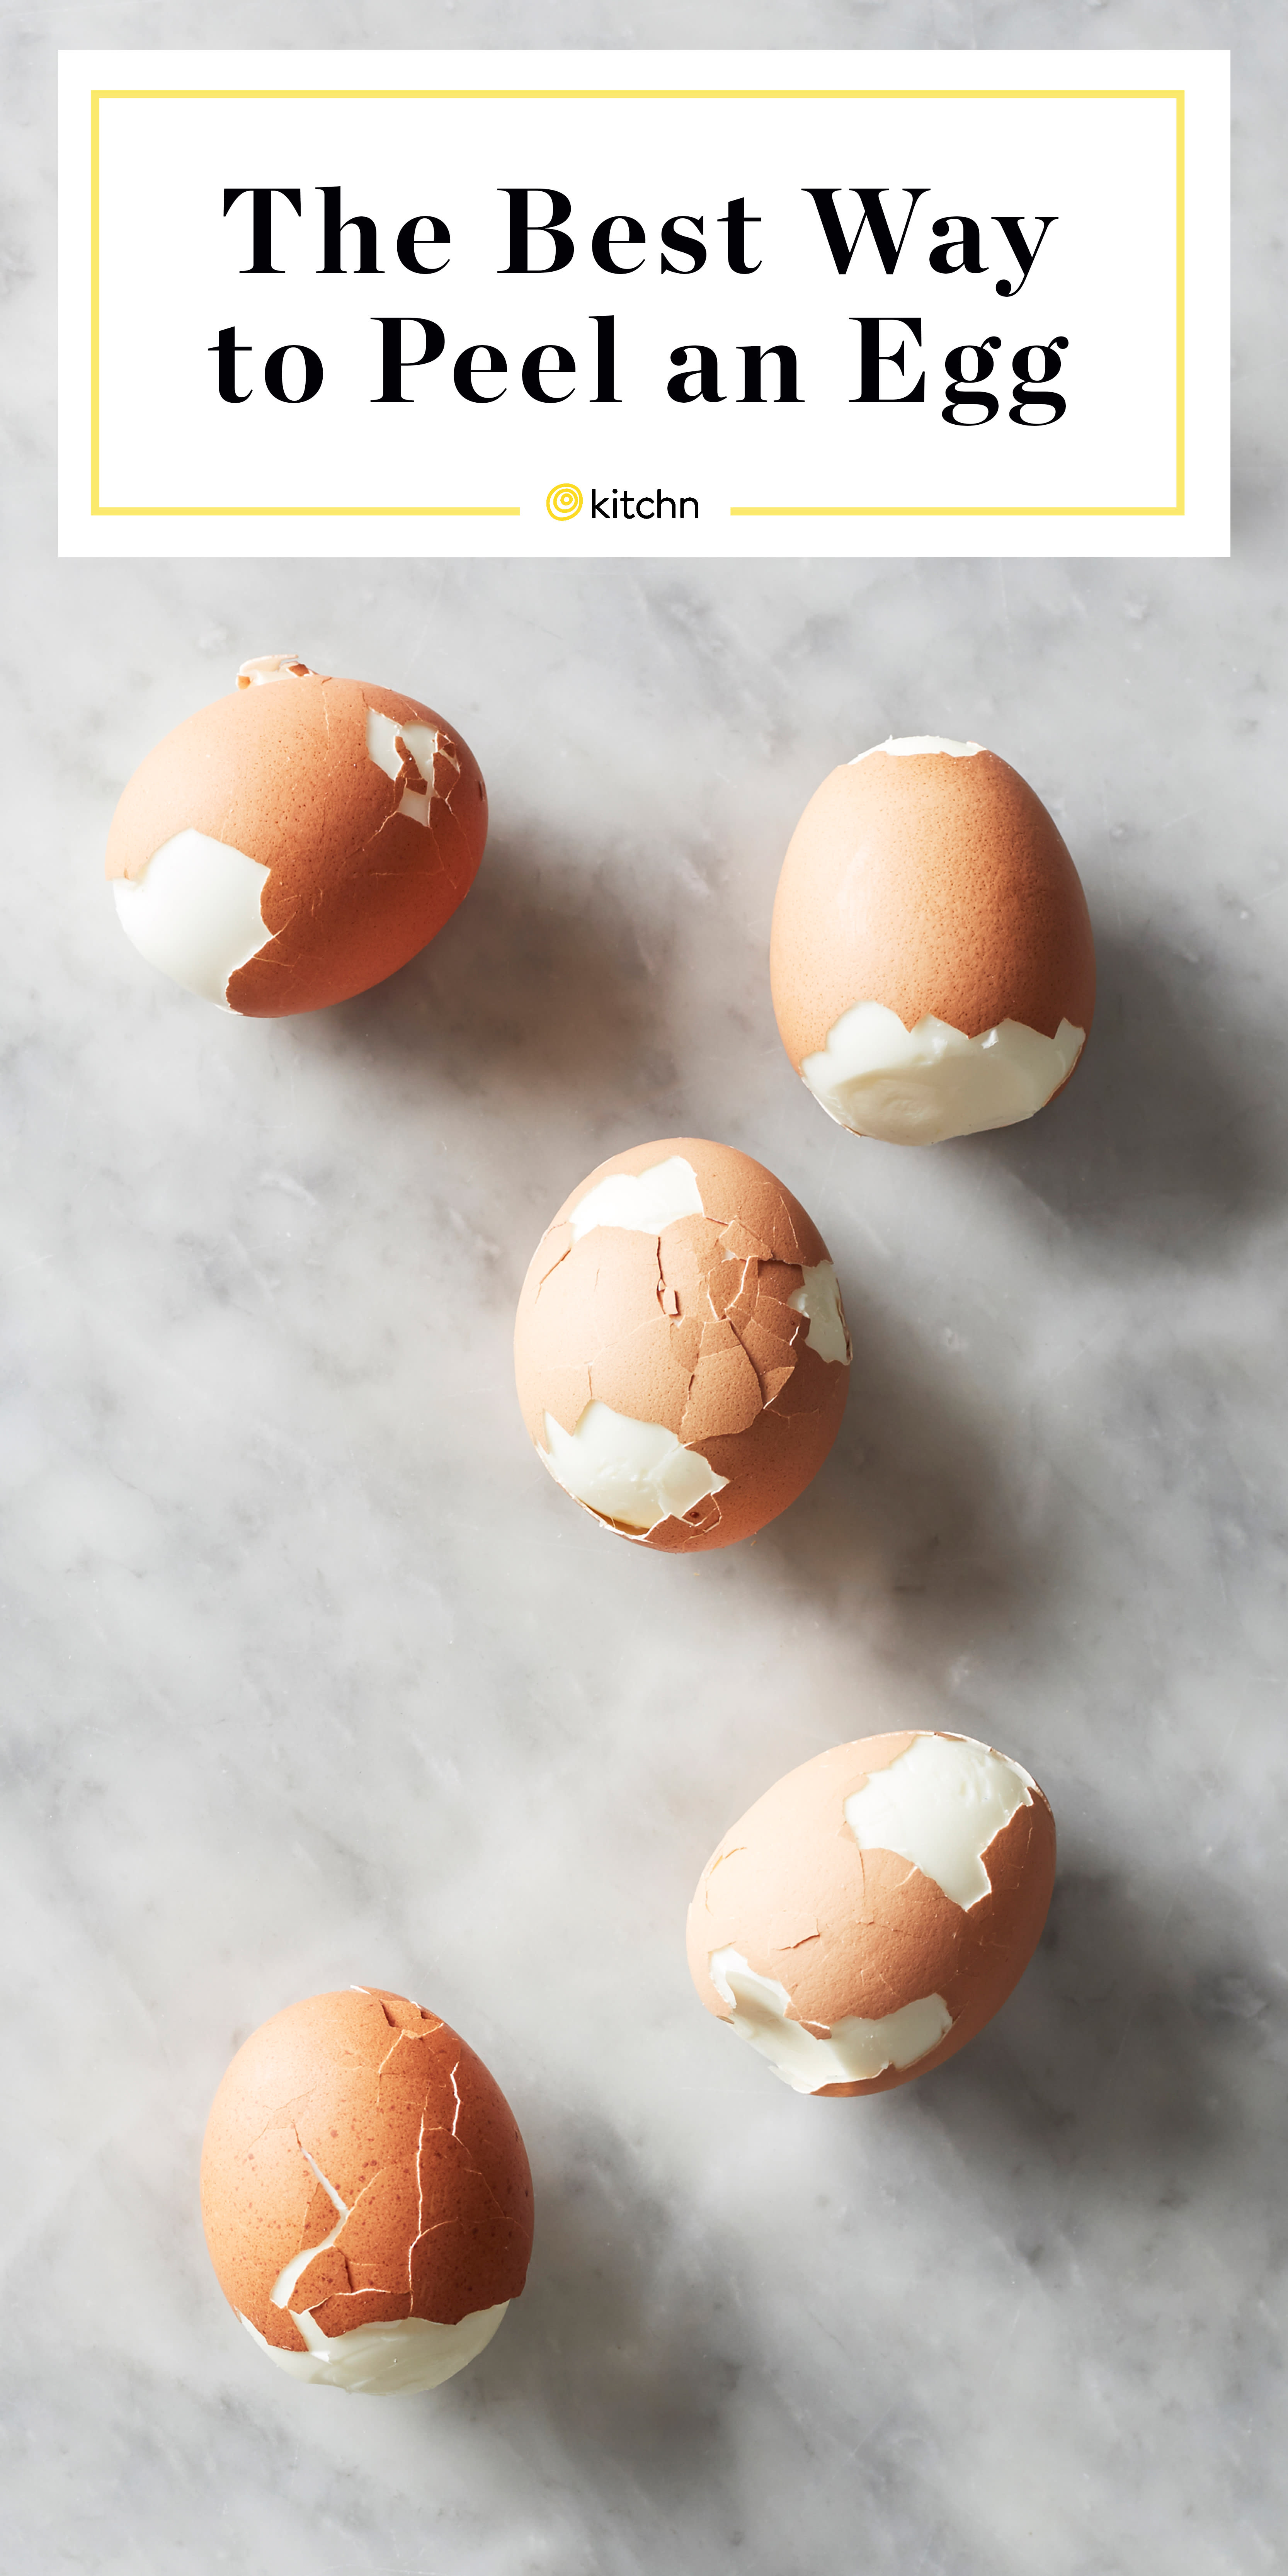 We Try It: The Perfect Egg Maker